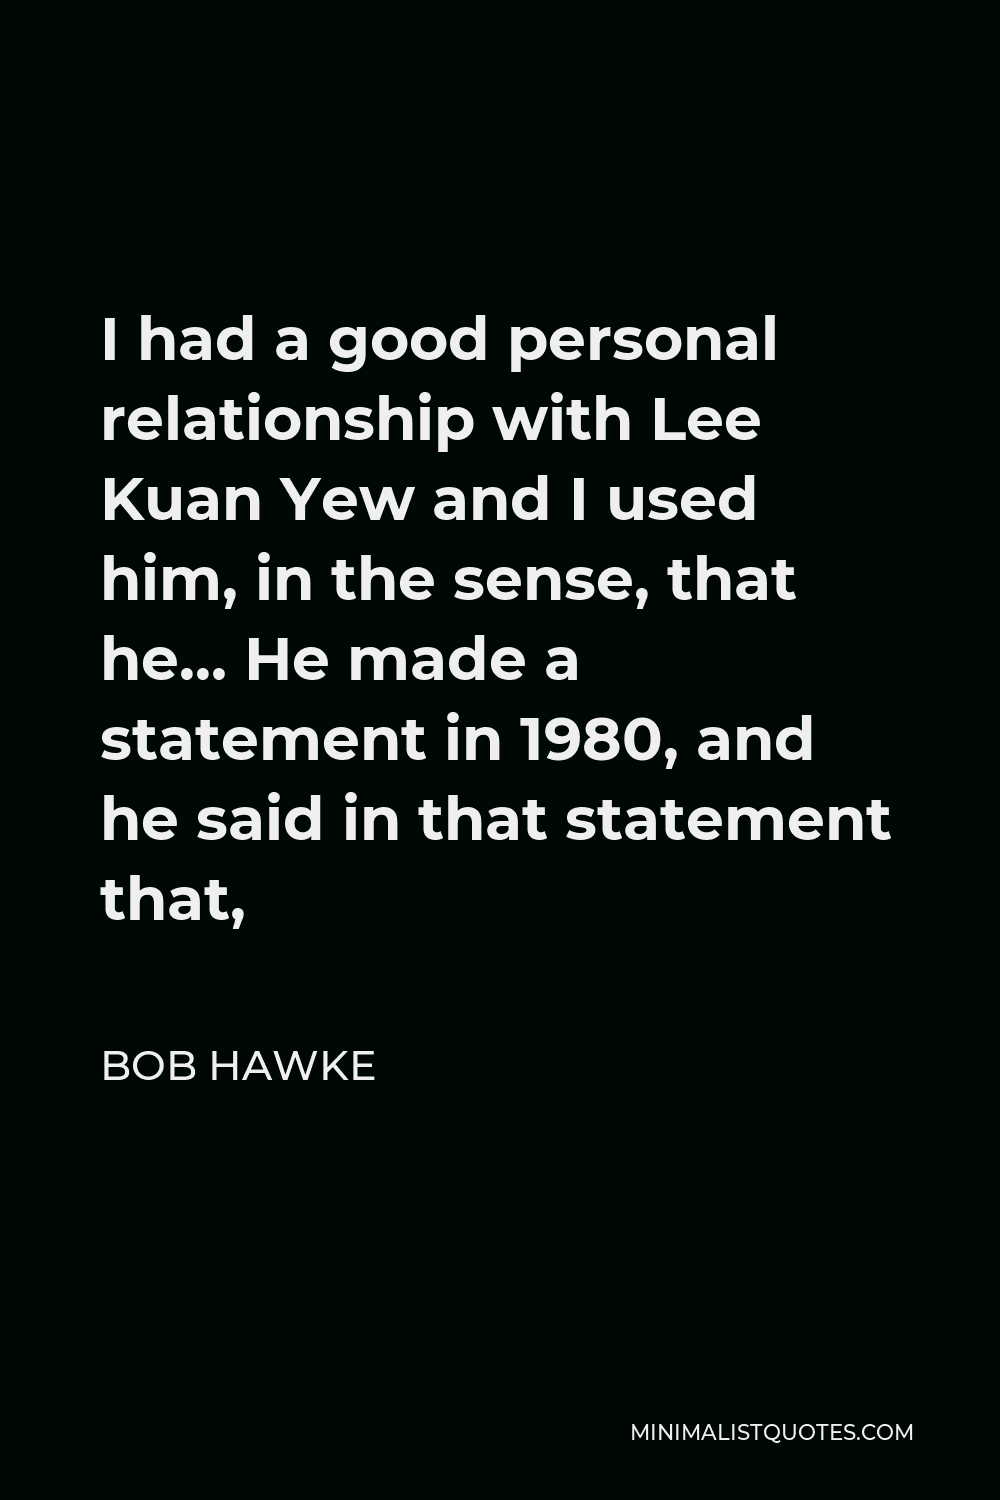 Bob Hawke Quote - I had a good personal relationship with Lee Kuan Yew and I used him, in the sense, that he… He made a statement in 1980, and he said in that statement that,